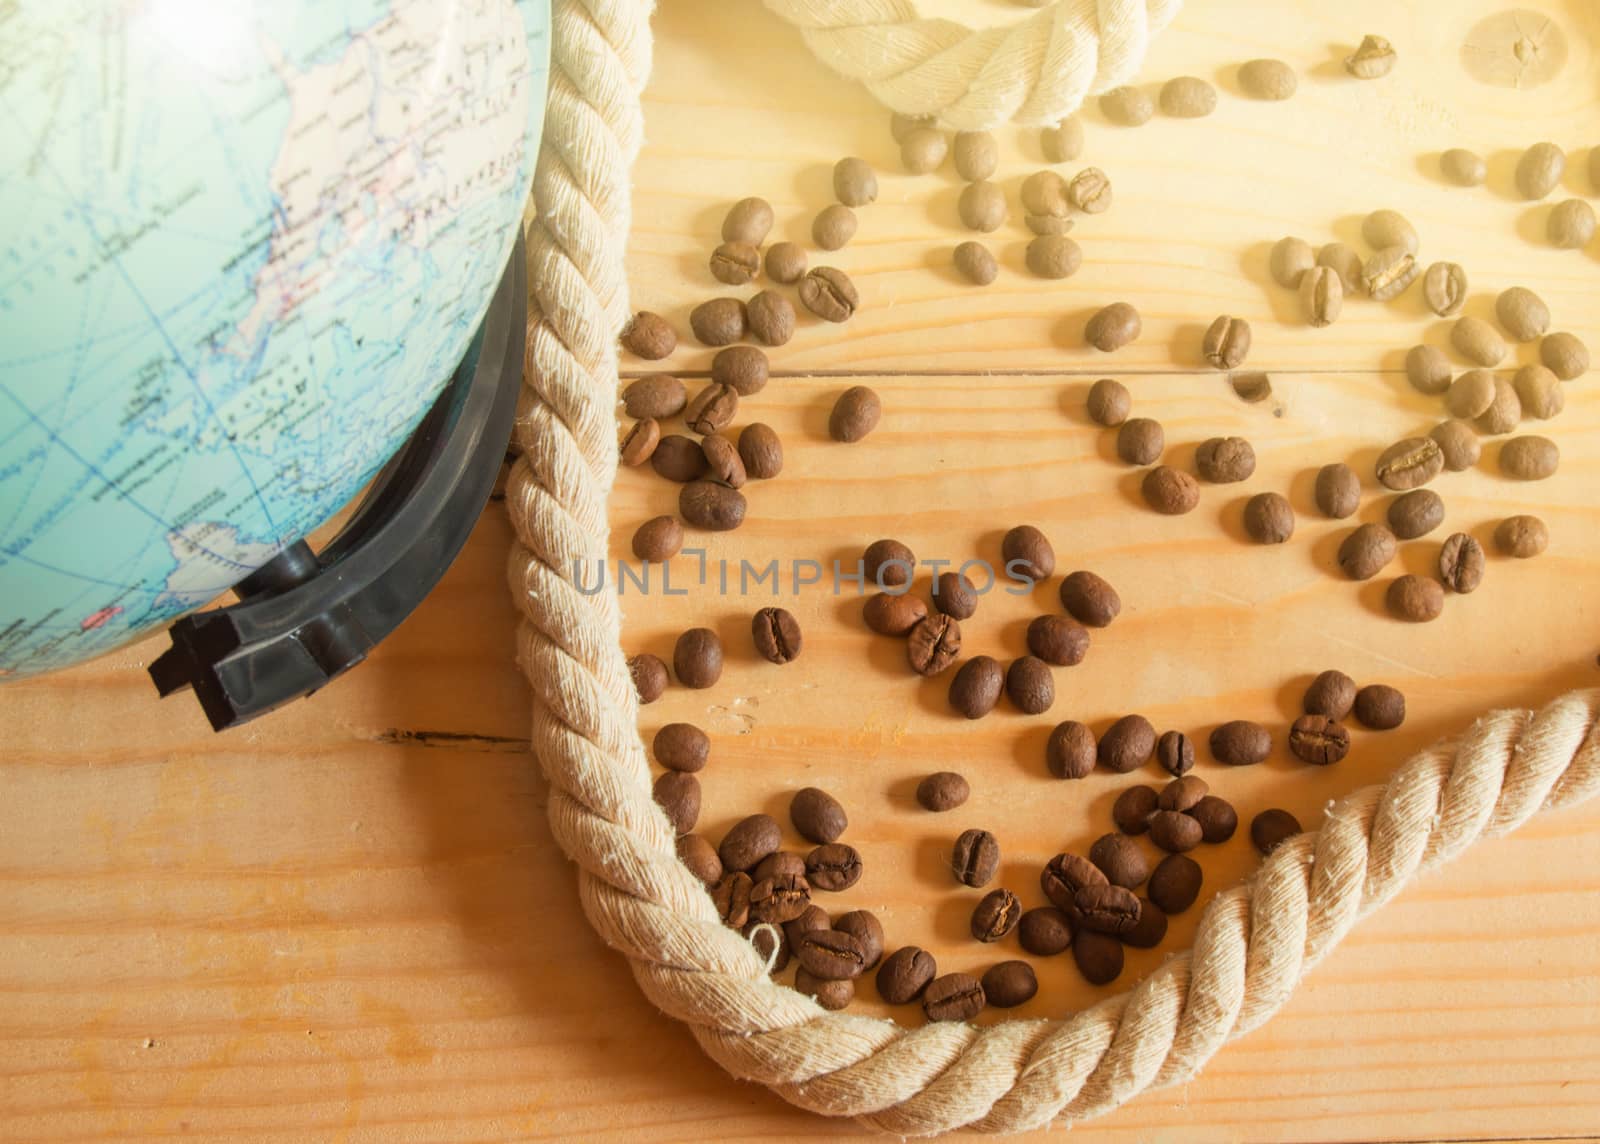 Happy OPENING day of Columbus. A globe, a rope, coffee beans on a wooden Board, SOLAR LIGHT.